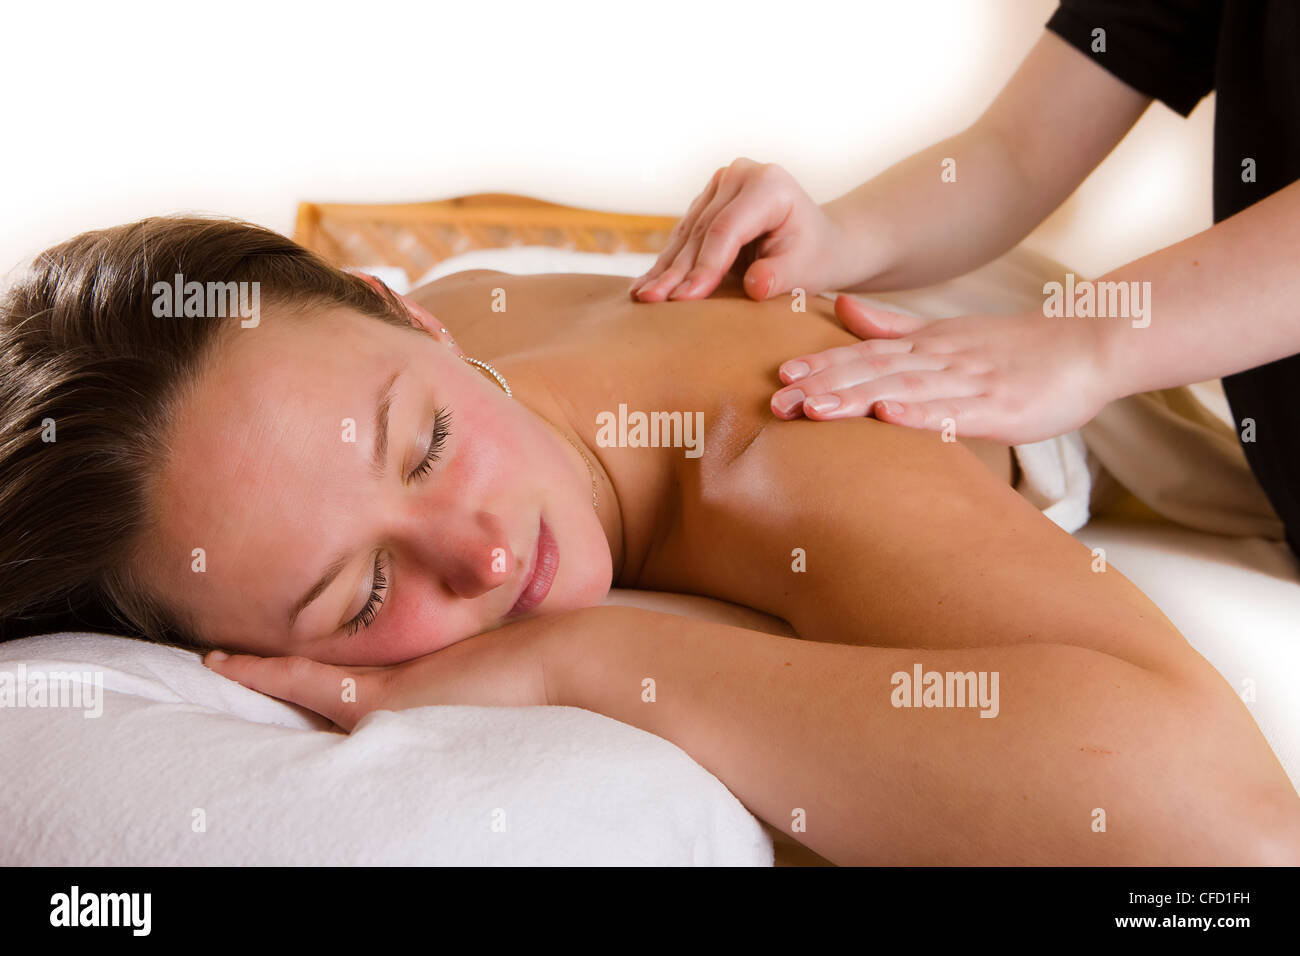 Young female receiving relaxing body massage Stock Photo